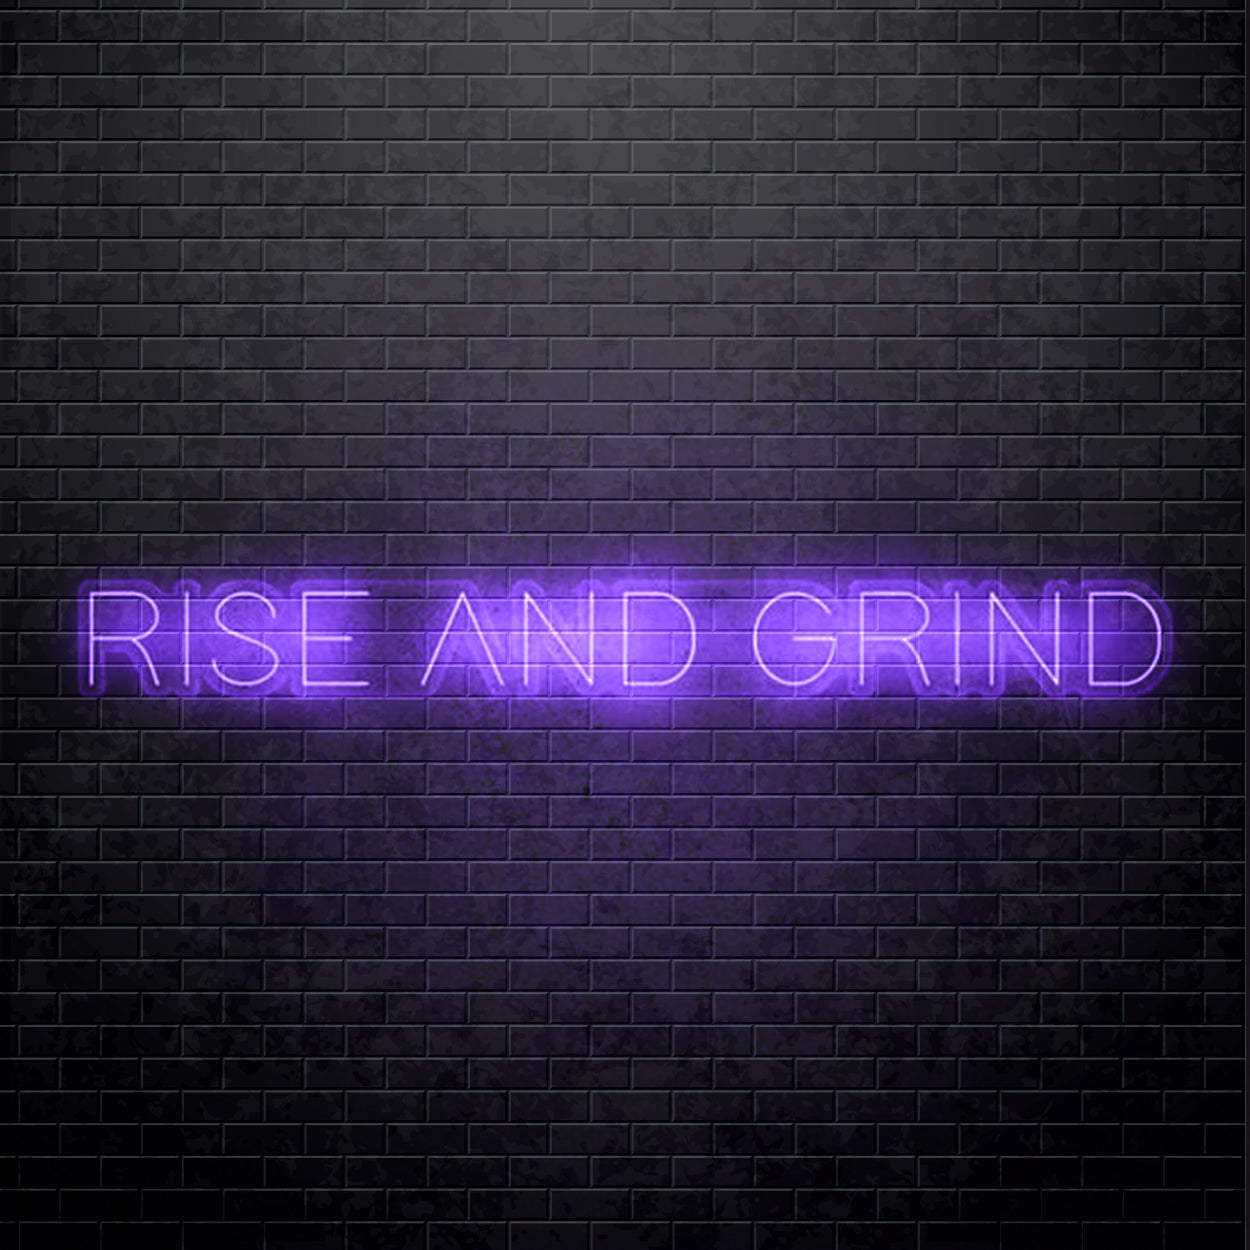 LED-Leuchtreklame - Rise and grind